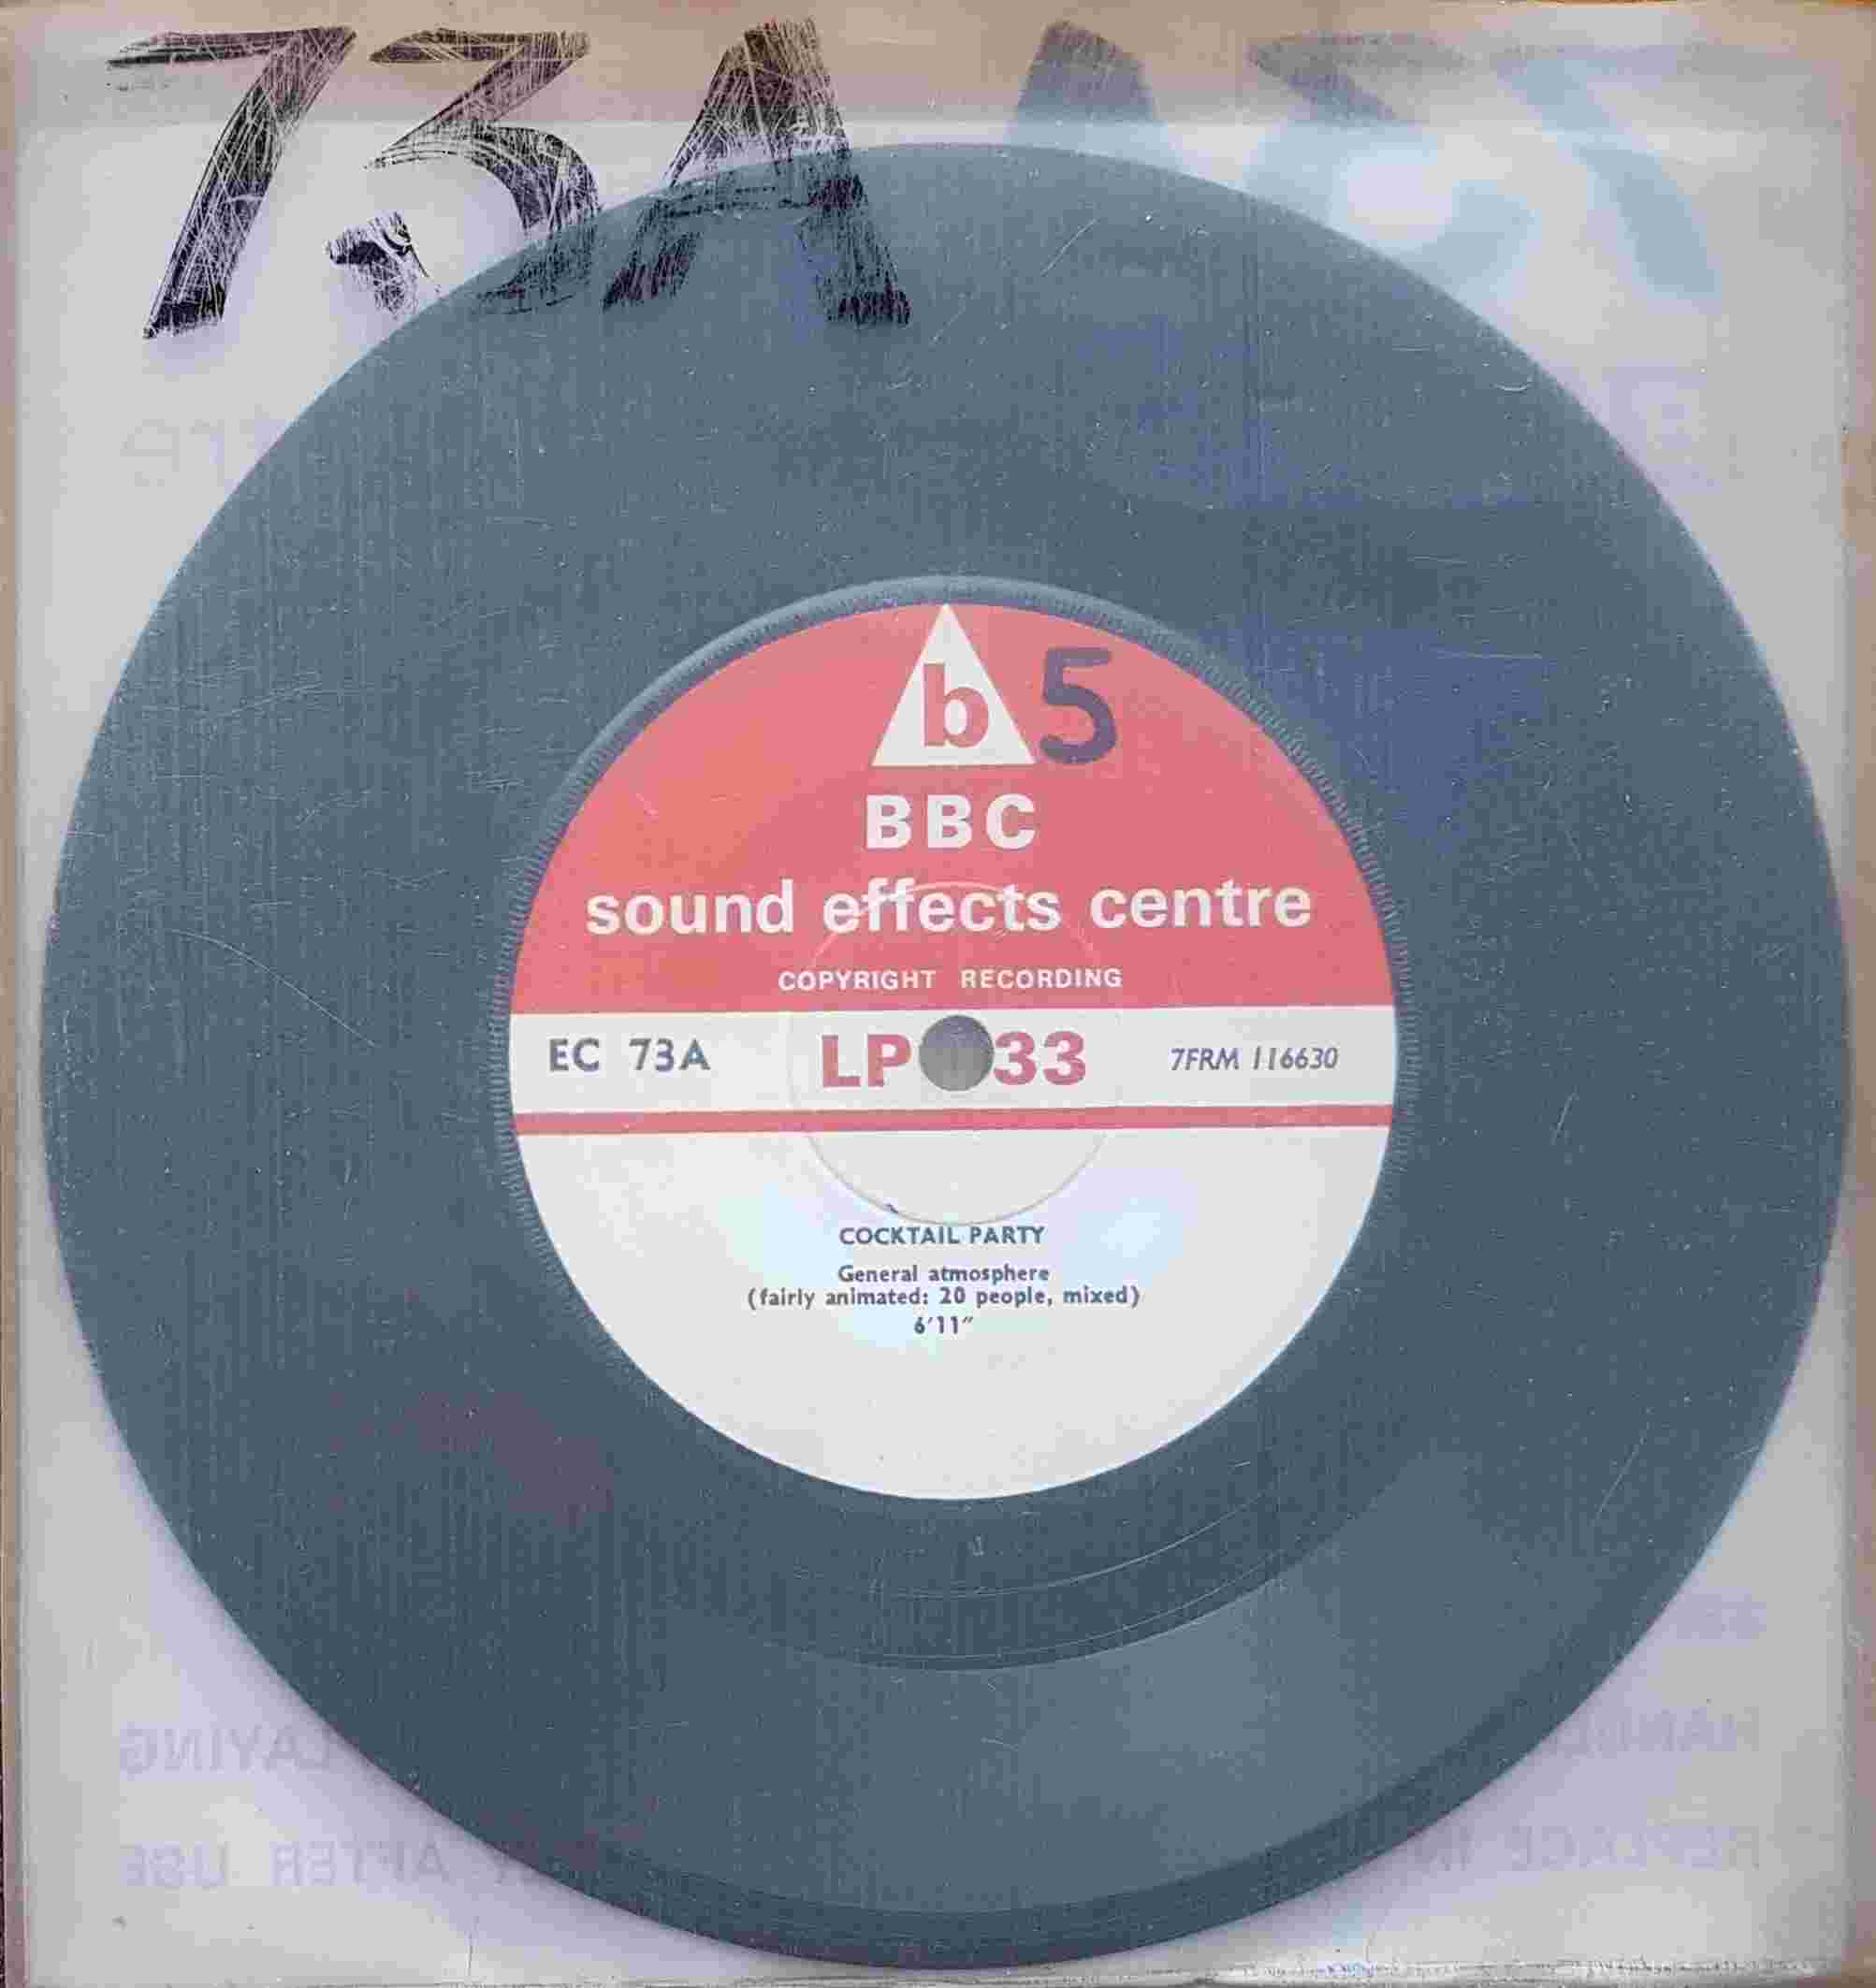 Picture of EC 73A Cocktail party by artist Not registered from the BBC records and Tapes library